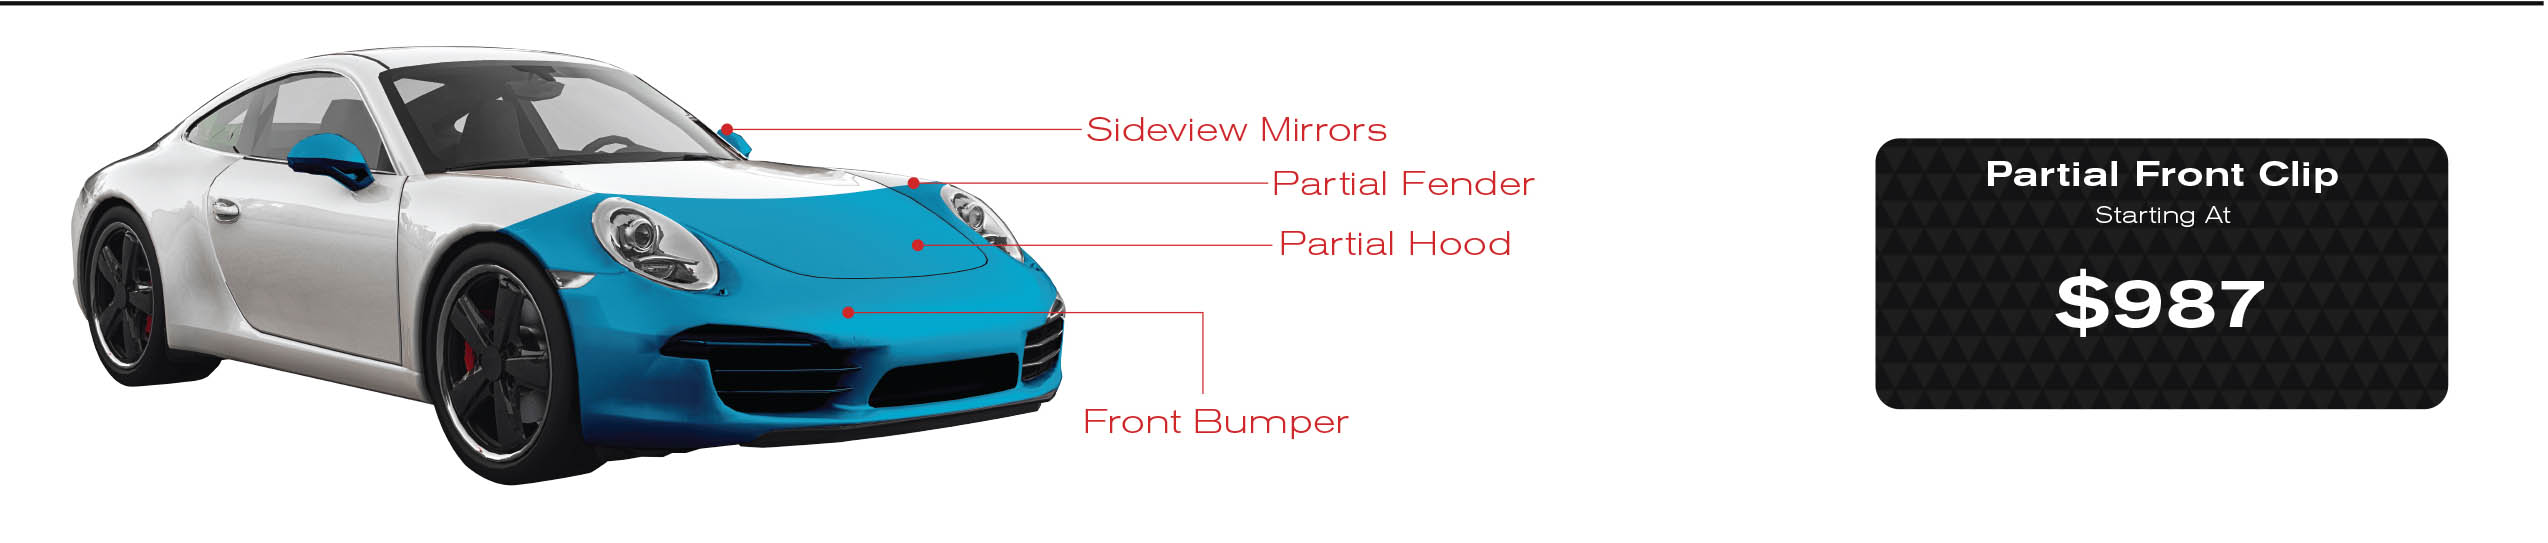 Partial Font Clip (PPF) Paint Protection Film - Clear Bra Cost-Pricing